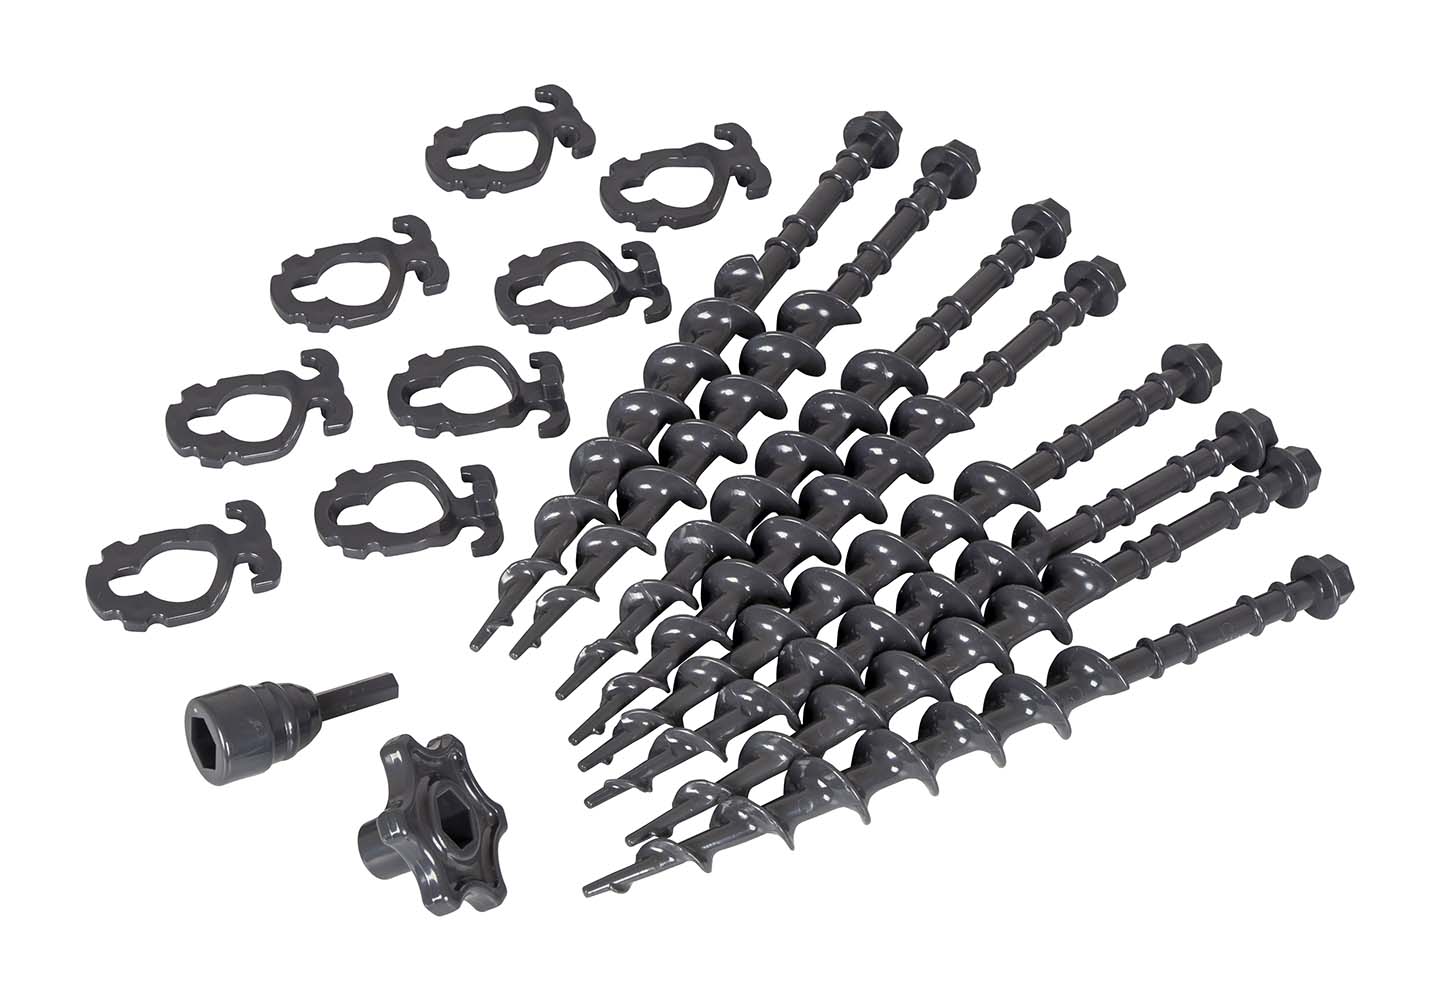 4162015 An 8-part screw pegs set made of strong plastic reinforced with fiberglass. Suitable for hard and soft surfaces. The pegs can be turned into and out of the ground by hand, but also with a drill. Delivered with 8 clips and 2 drill adapters. Includes drill and hand adapter